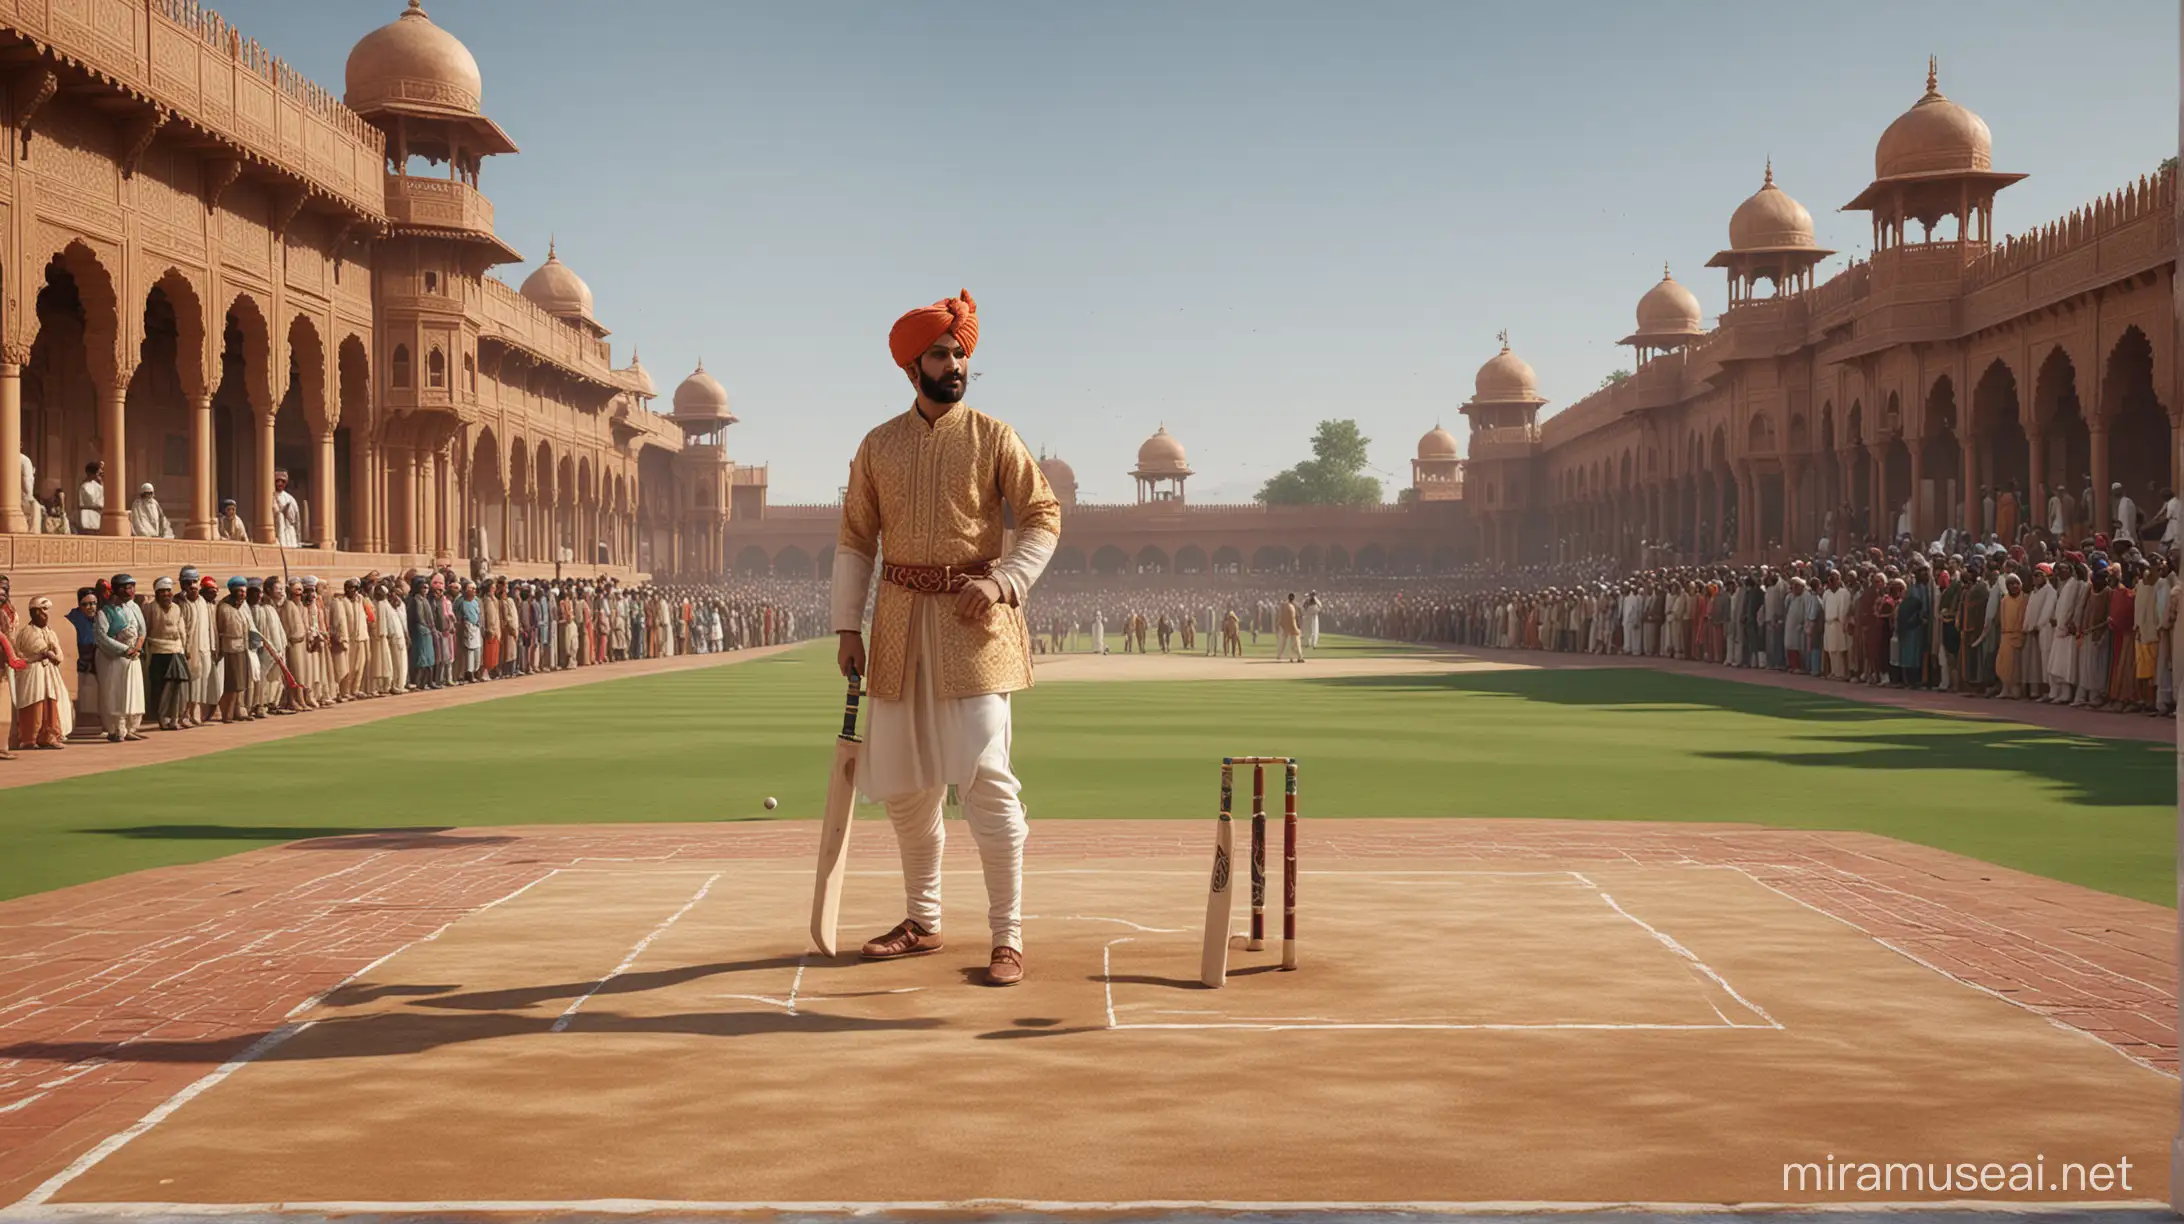 Mughal Emperor Akbar Engaged in a Historical Cricket Match in Traditional Attire